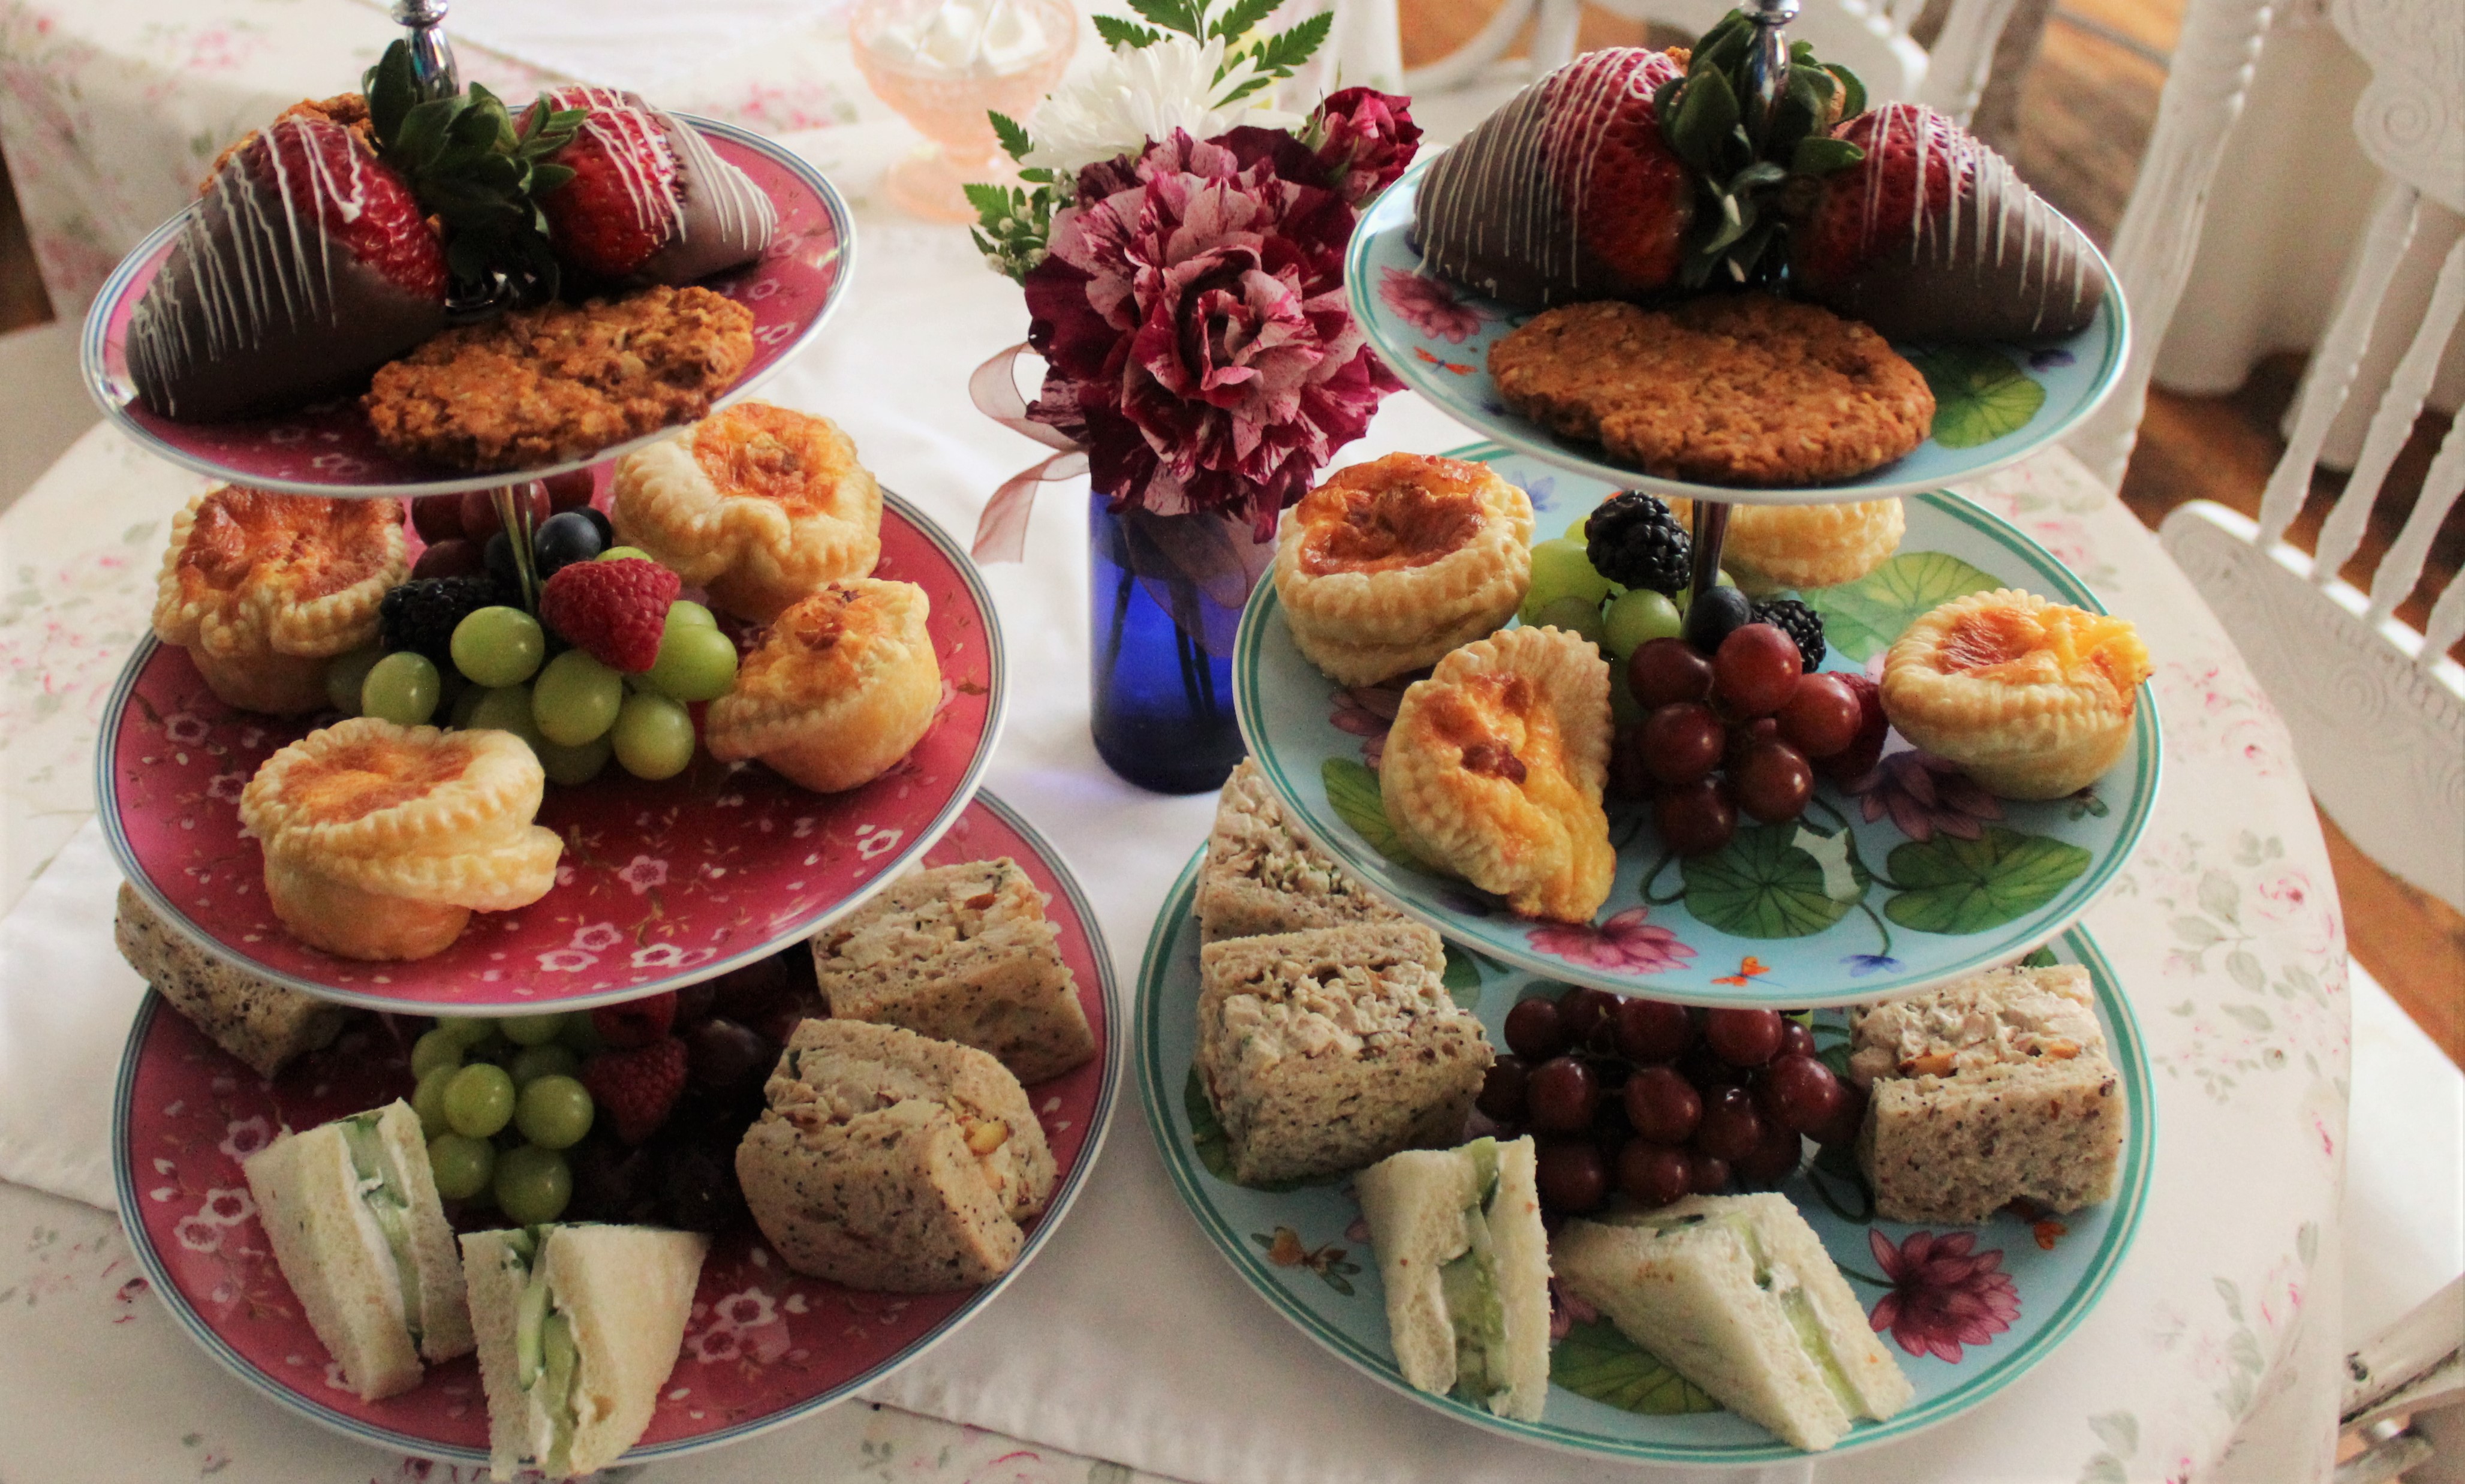 British-style Afternoon Tea Trays, photo by Carrie Uffindell